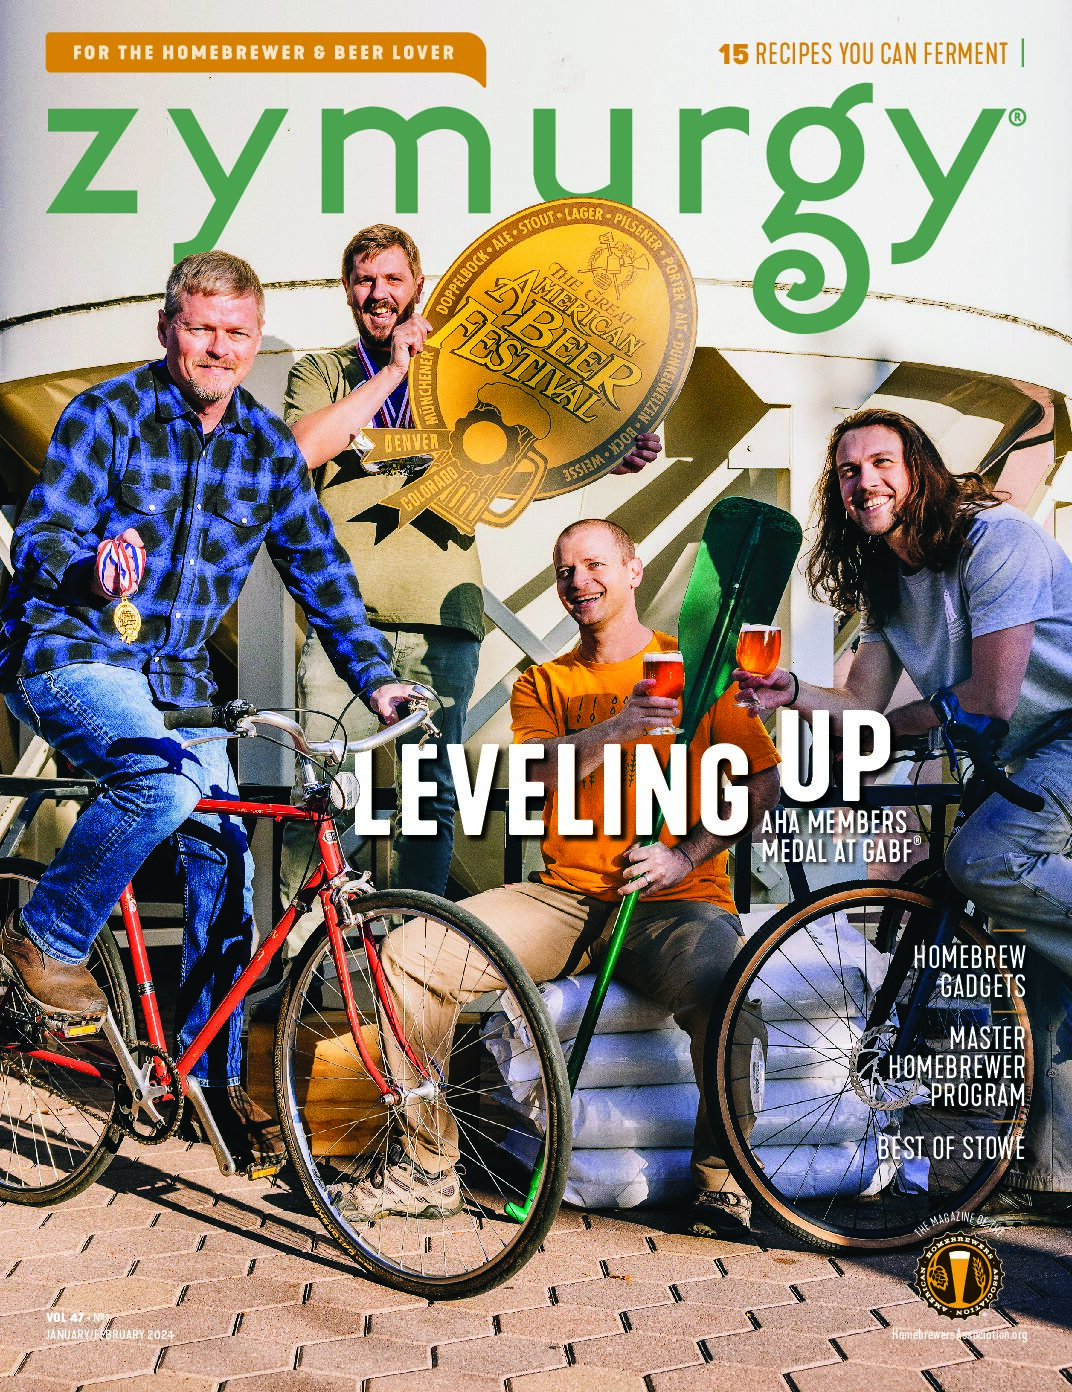 We Made the Cover of Zymurgy!